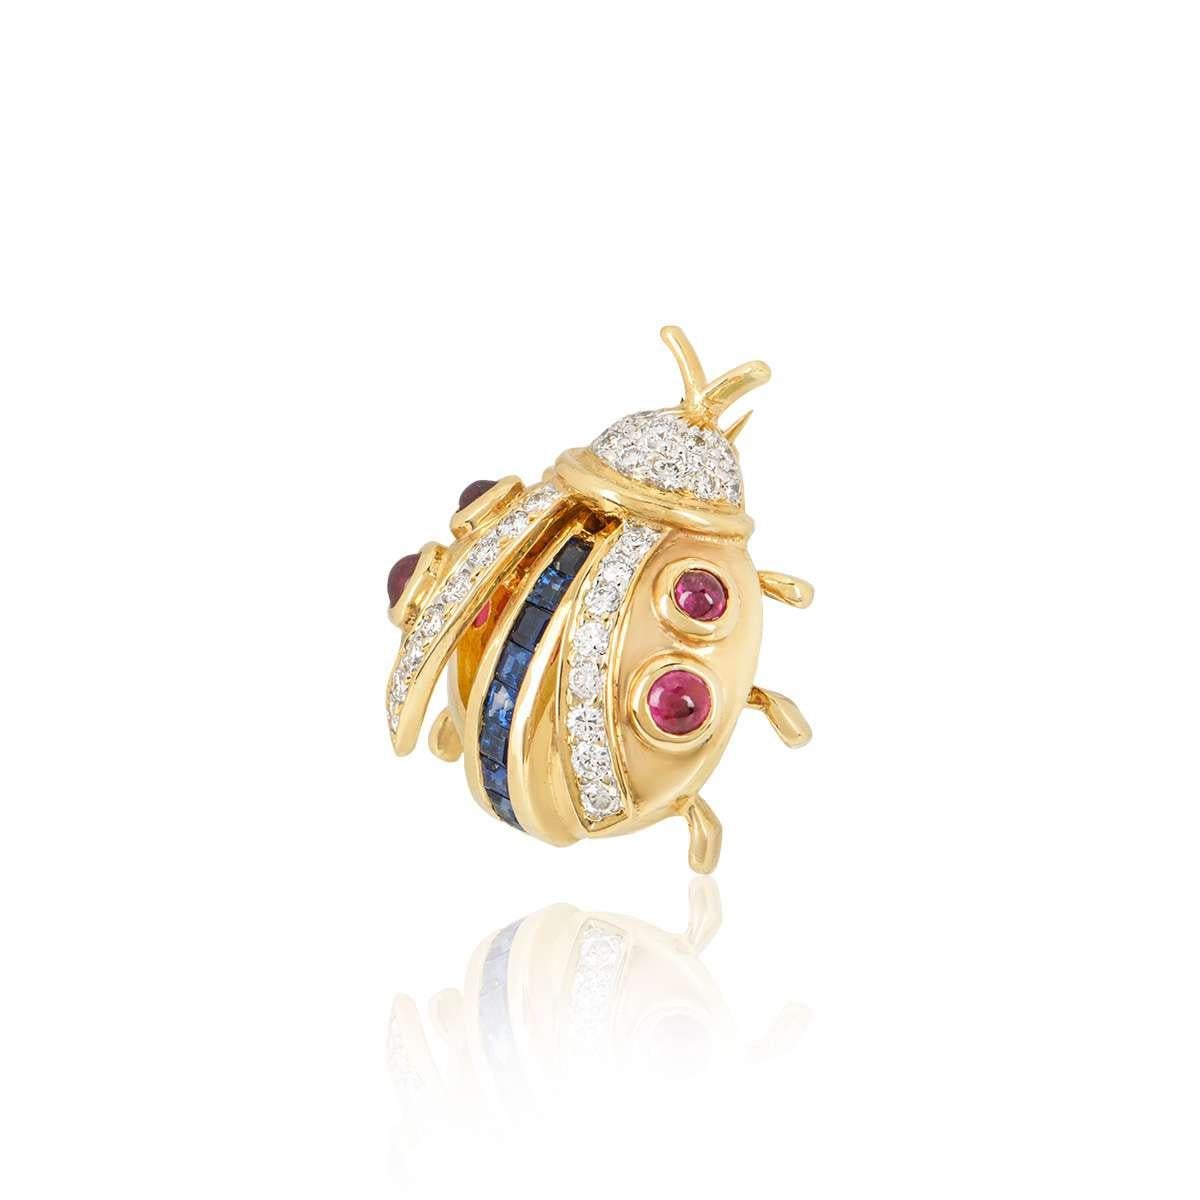 An 18k yellow gold Ladybird brooch. The brooch is set with 4 cabochon rubies throughout the wings, with a row of 9 square cut sapphires running through the centre of the body and 28 round brilliant cut diamonds set in the wings and head. The rubies